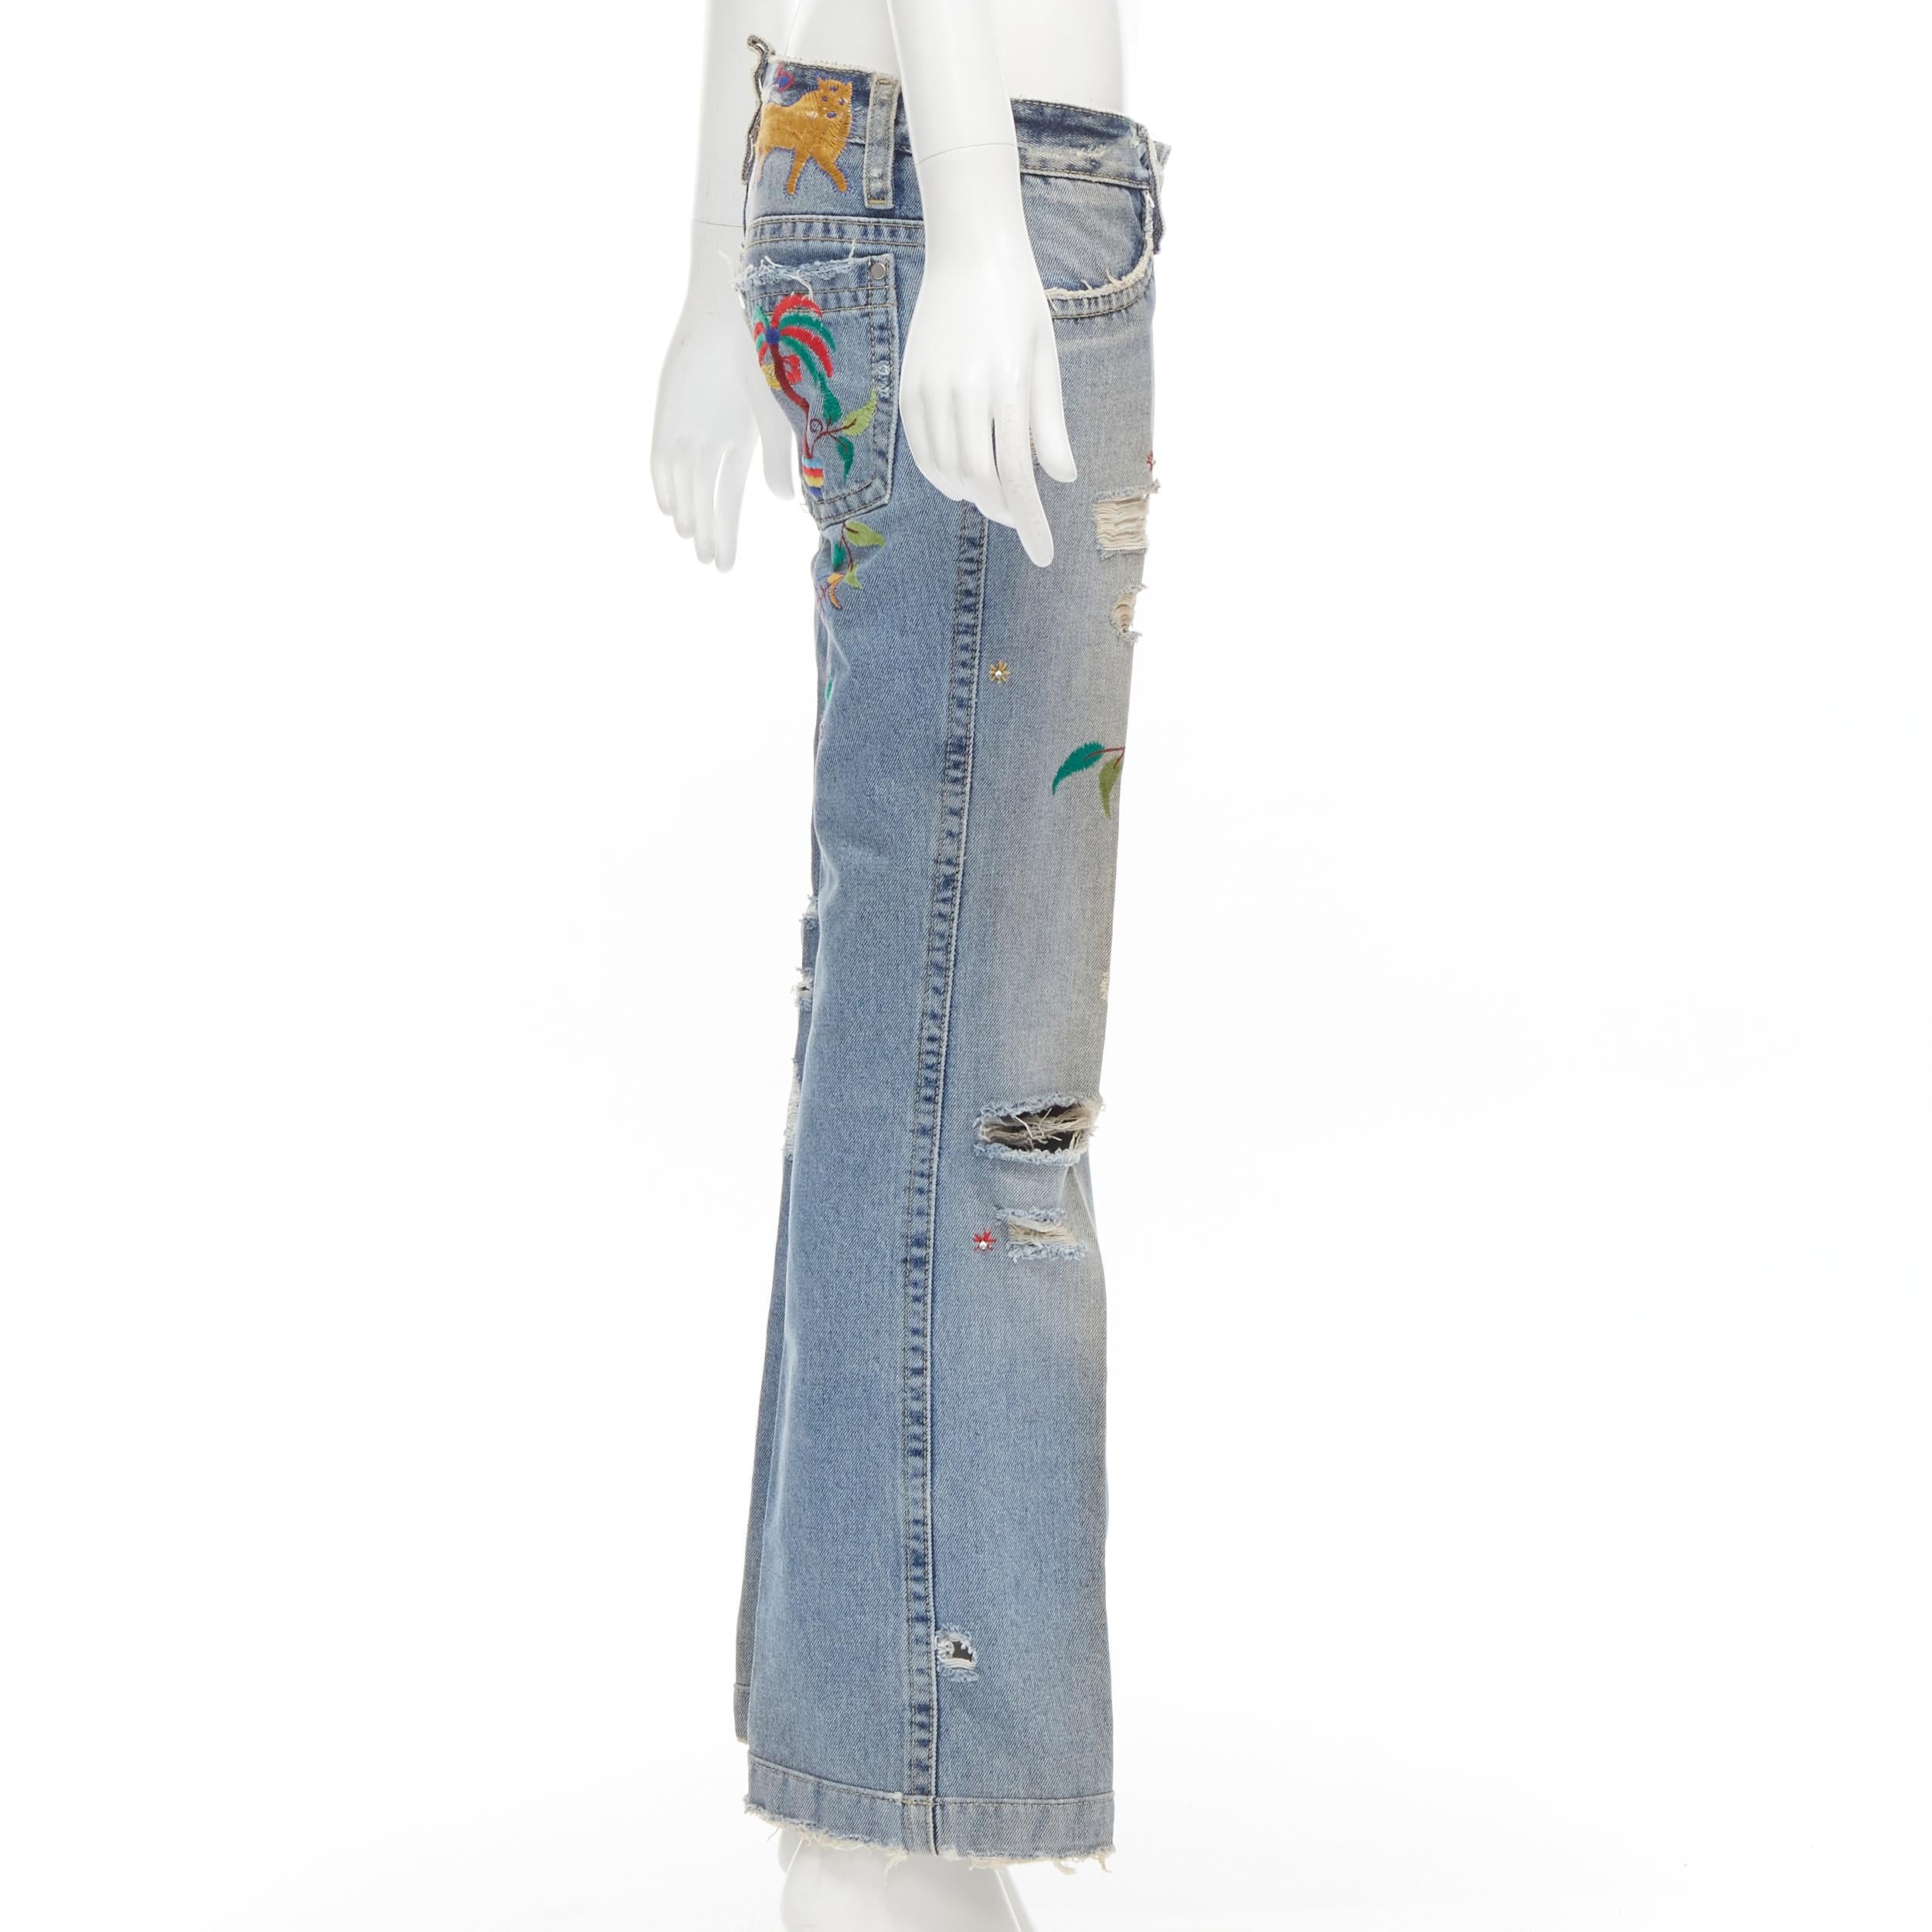 embroidered jeans bootcut